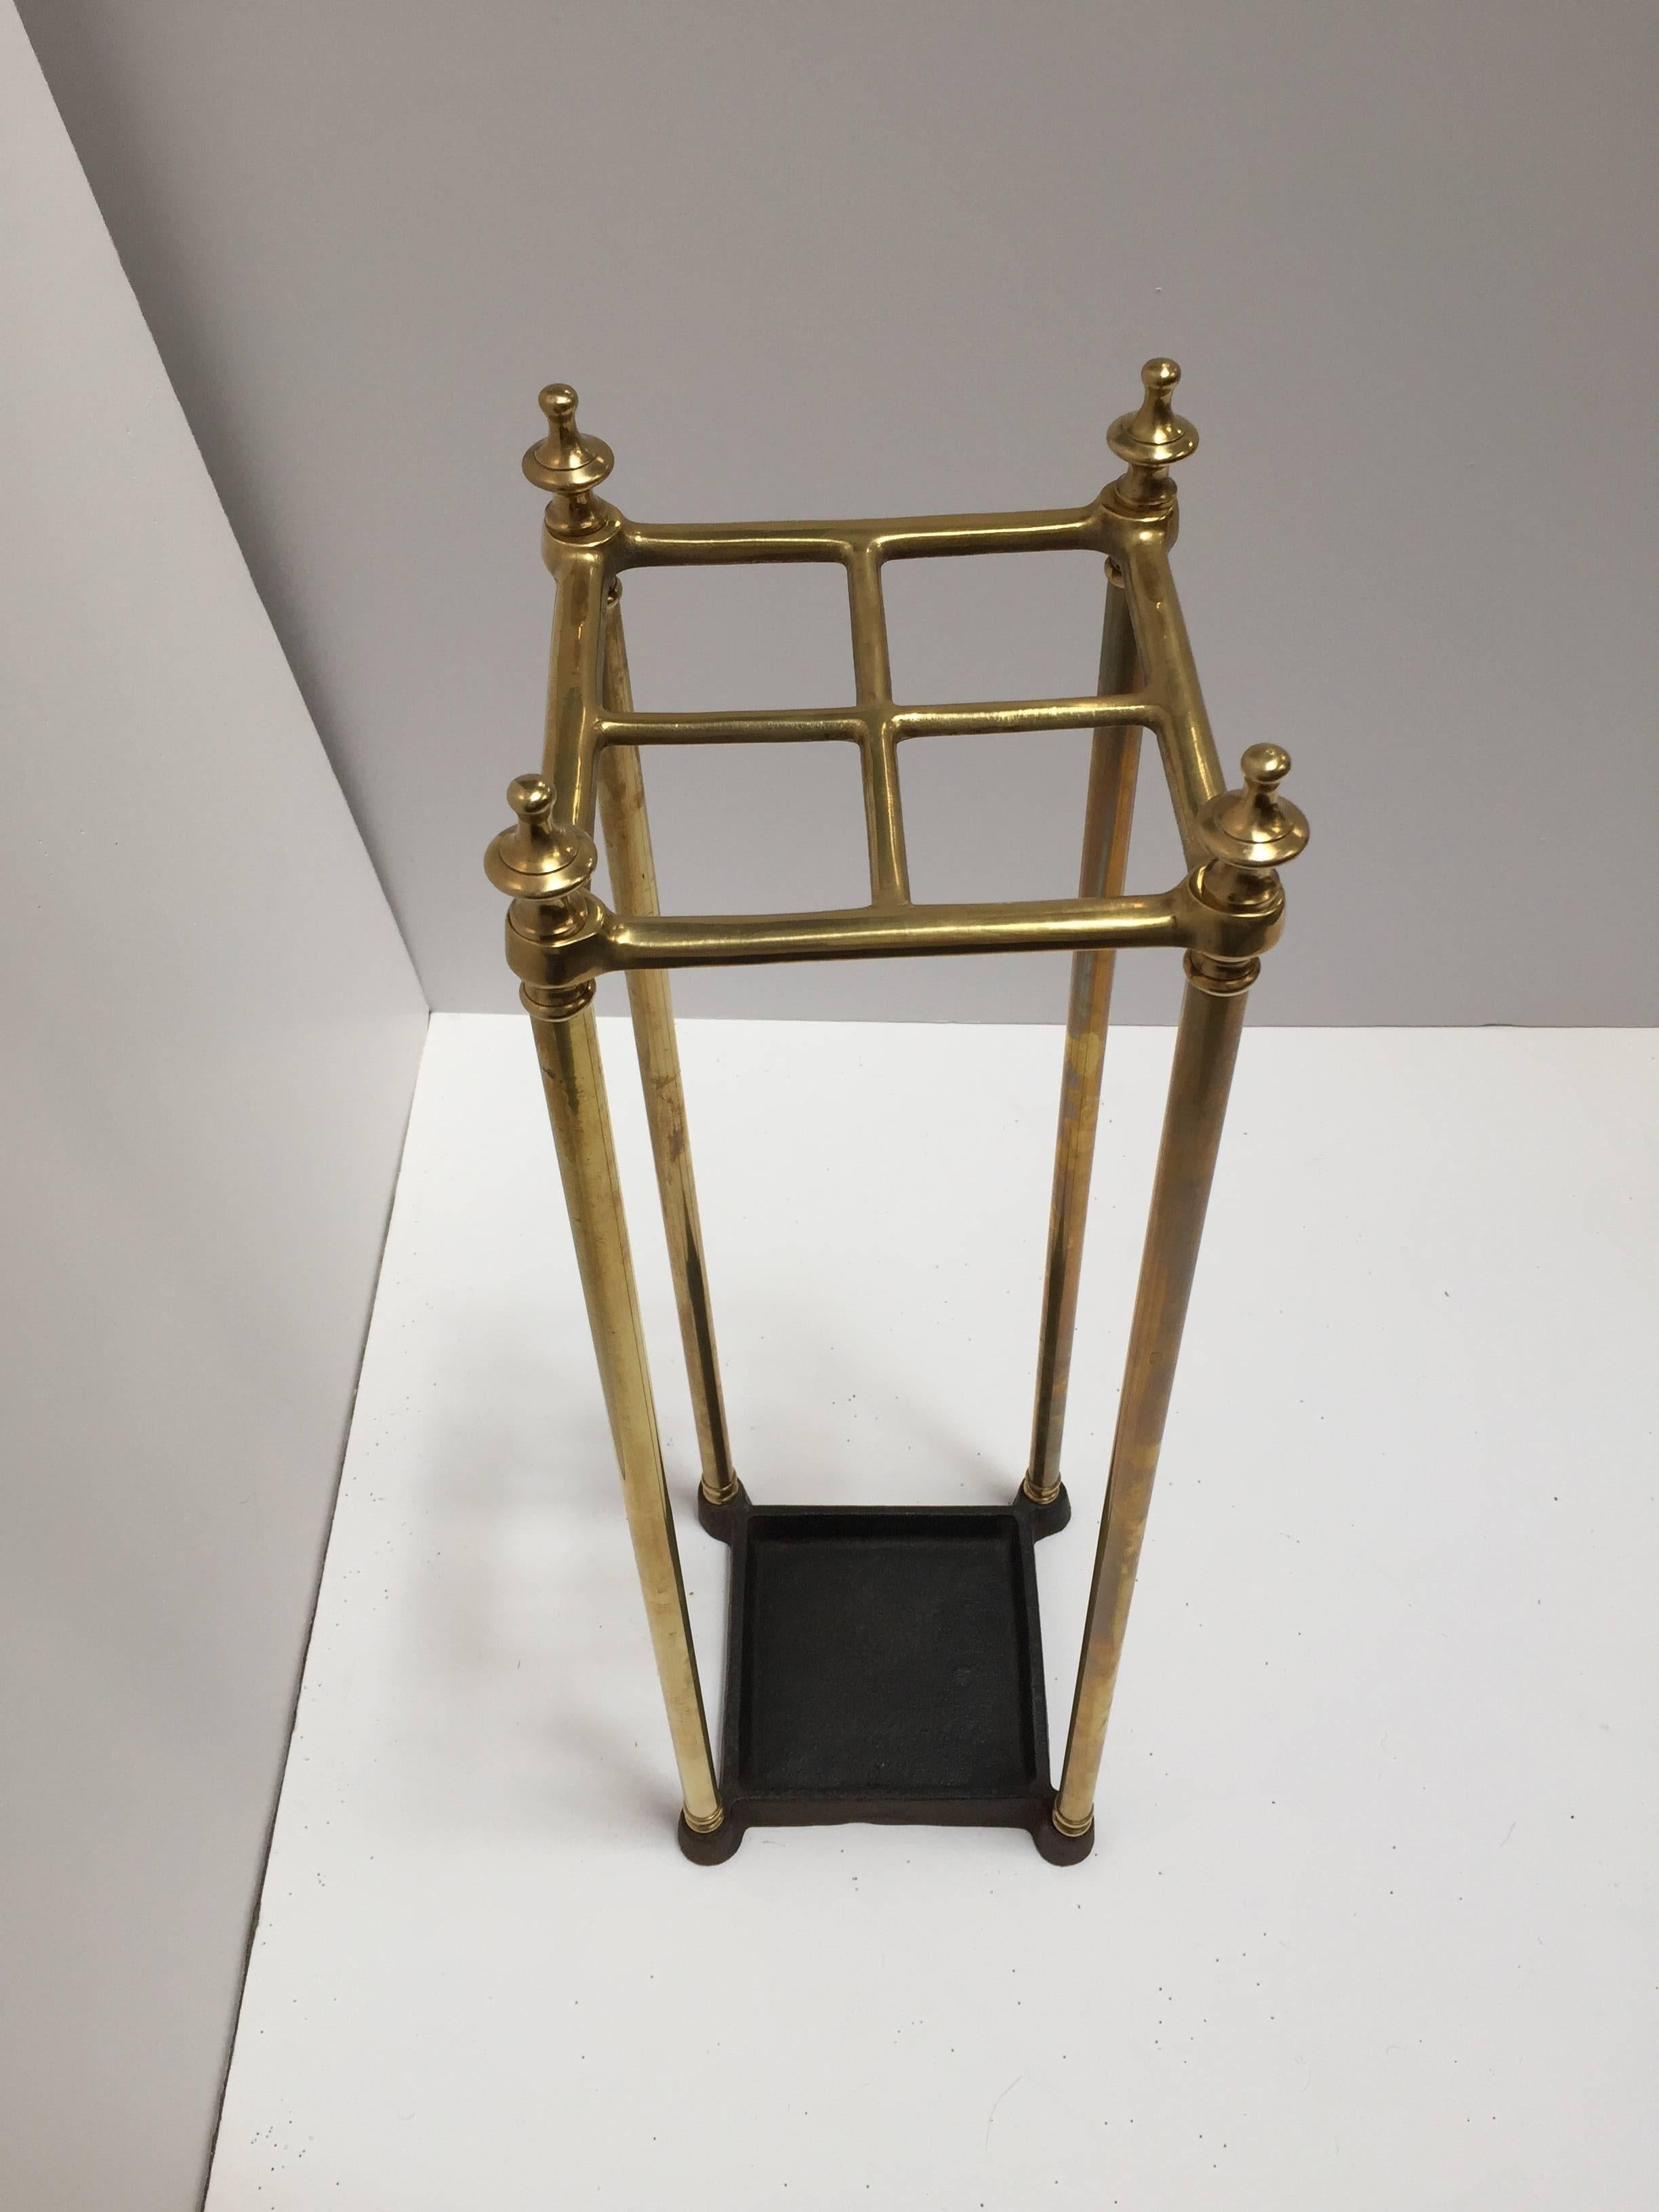 Fine mid-19th century Victorian umbrella stand with a brass top divided into four sections to hold either walking sticks or umbrellas.
Square umbrella brass valet rack with four sections and iron tray and supported upon a tubular frame with turned